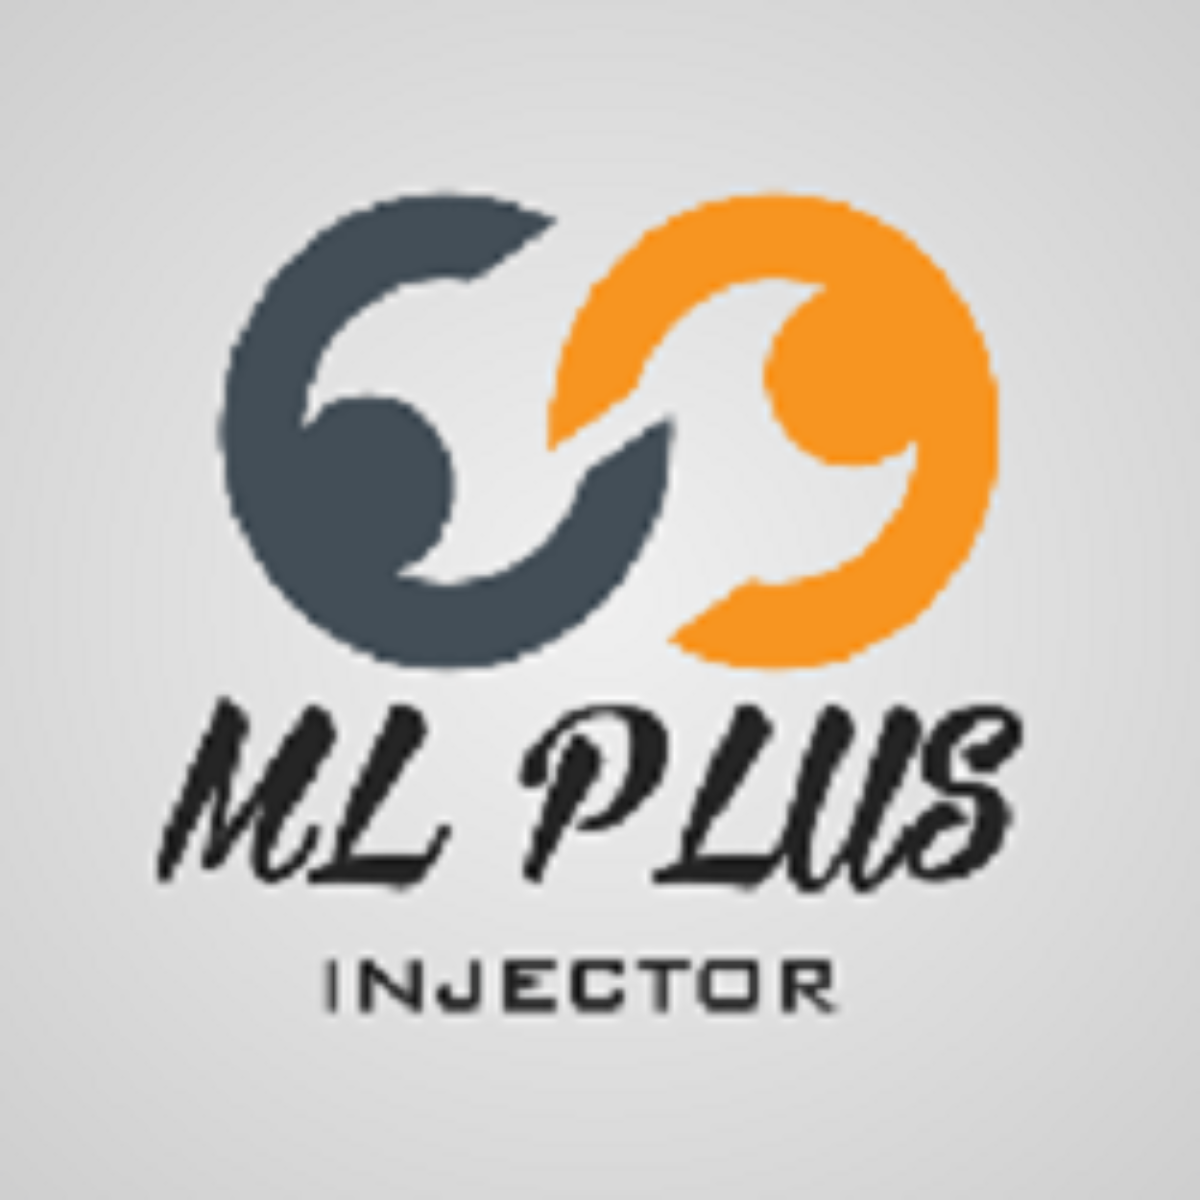 Ml Plus Injector Apk Download V26 Free For Android New Update